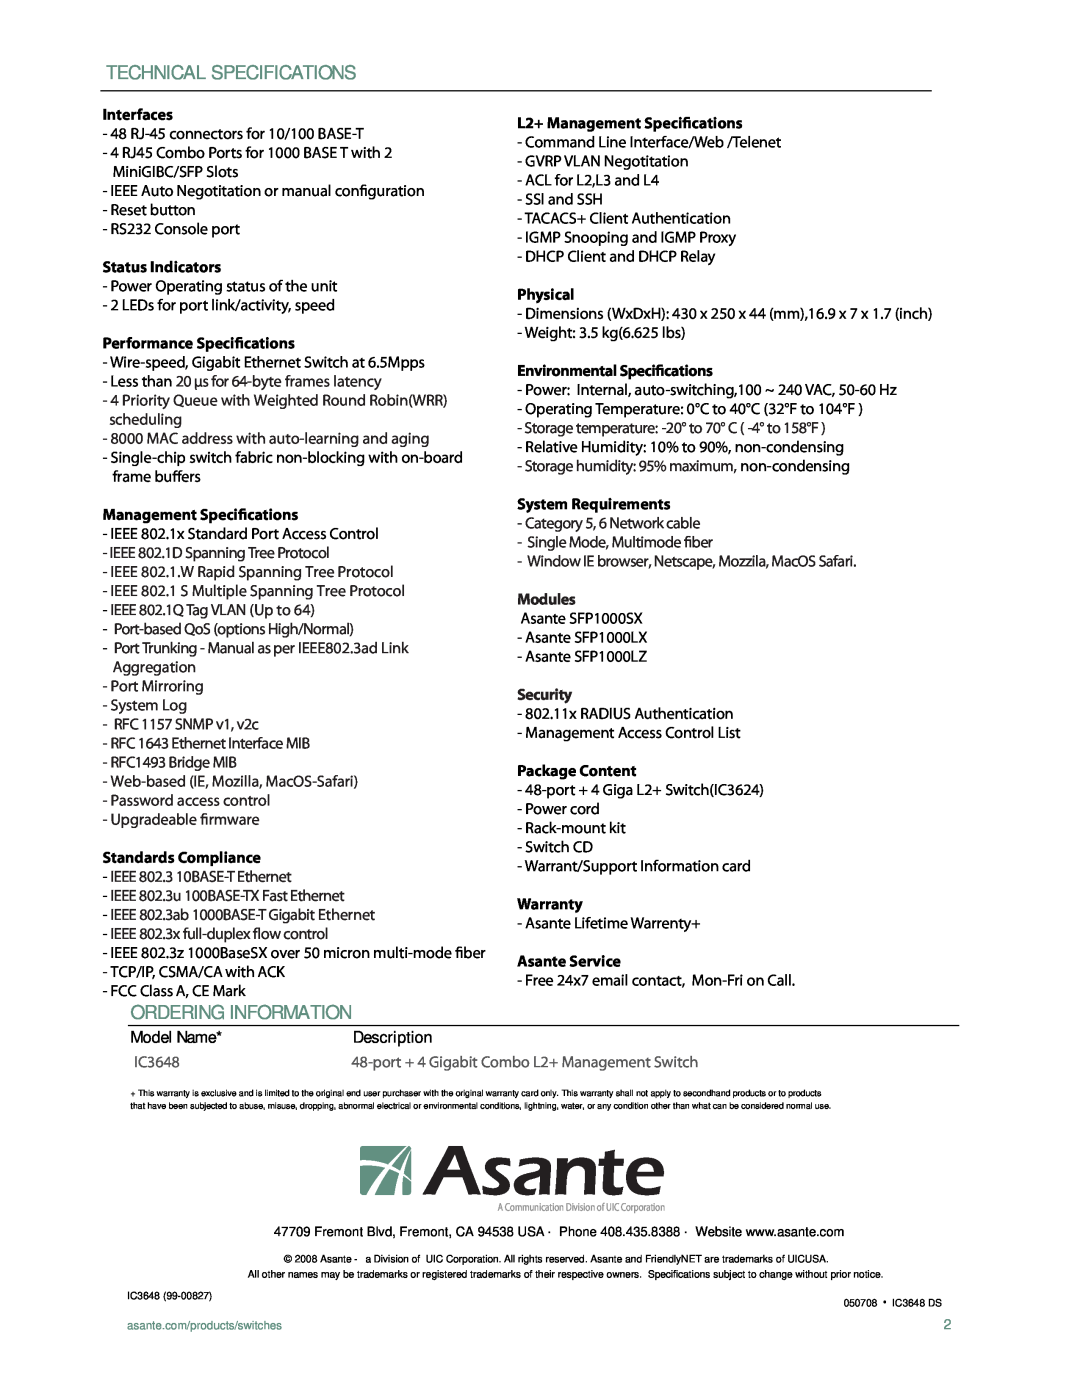 Asante Technologies IC3648 Technical Specifications, Ordering Information, Model Name, Environmental Specications, Modules 